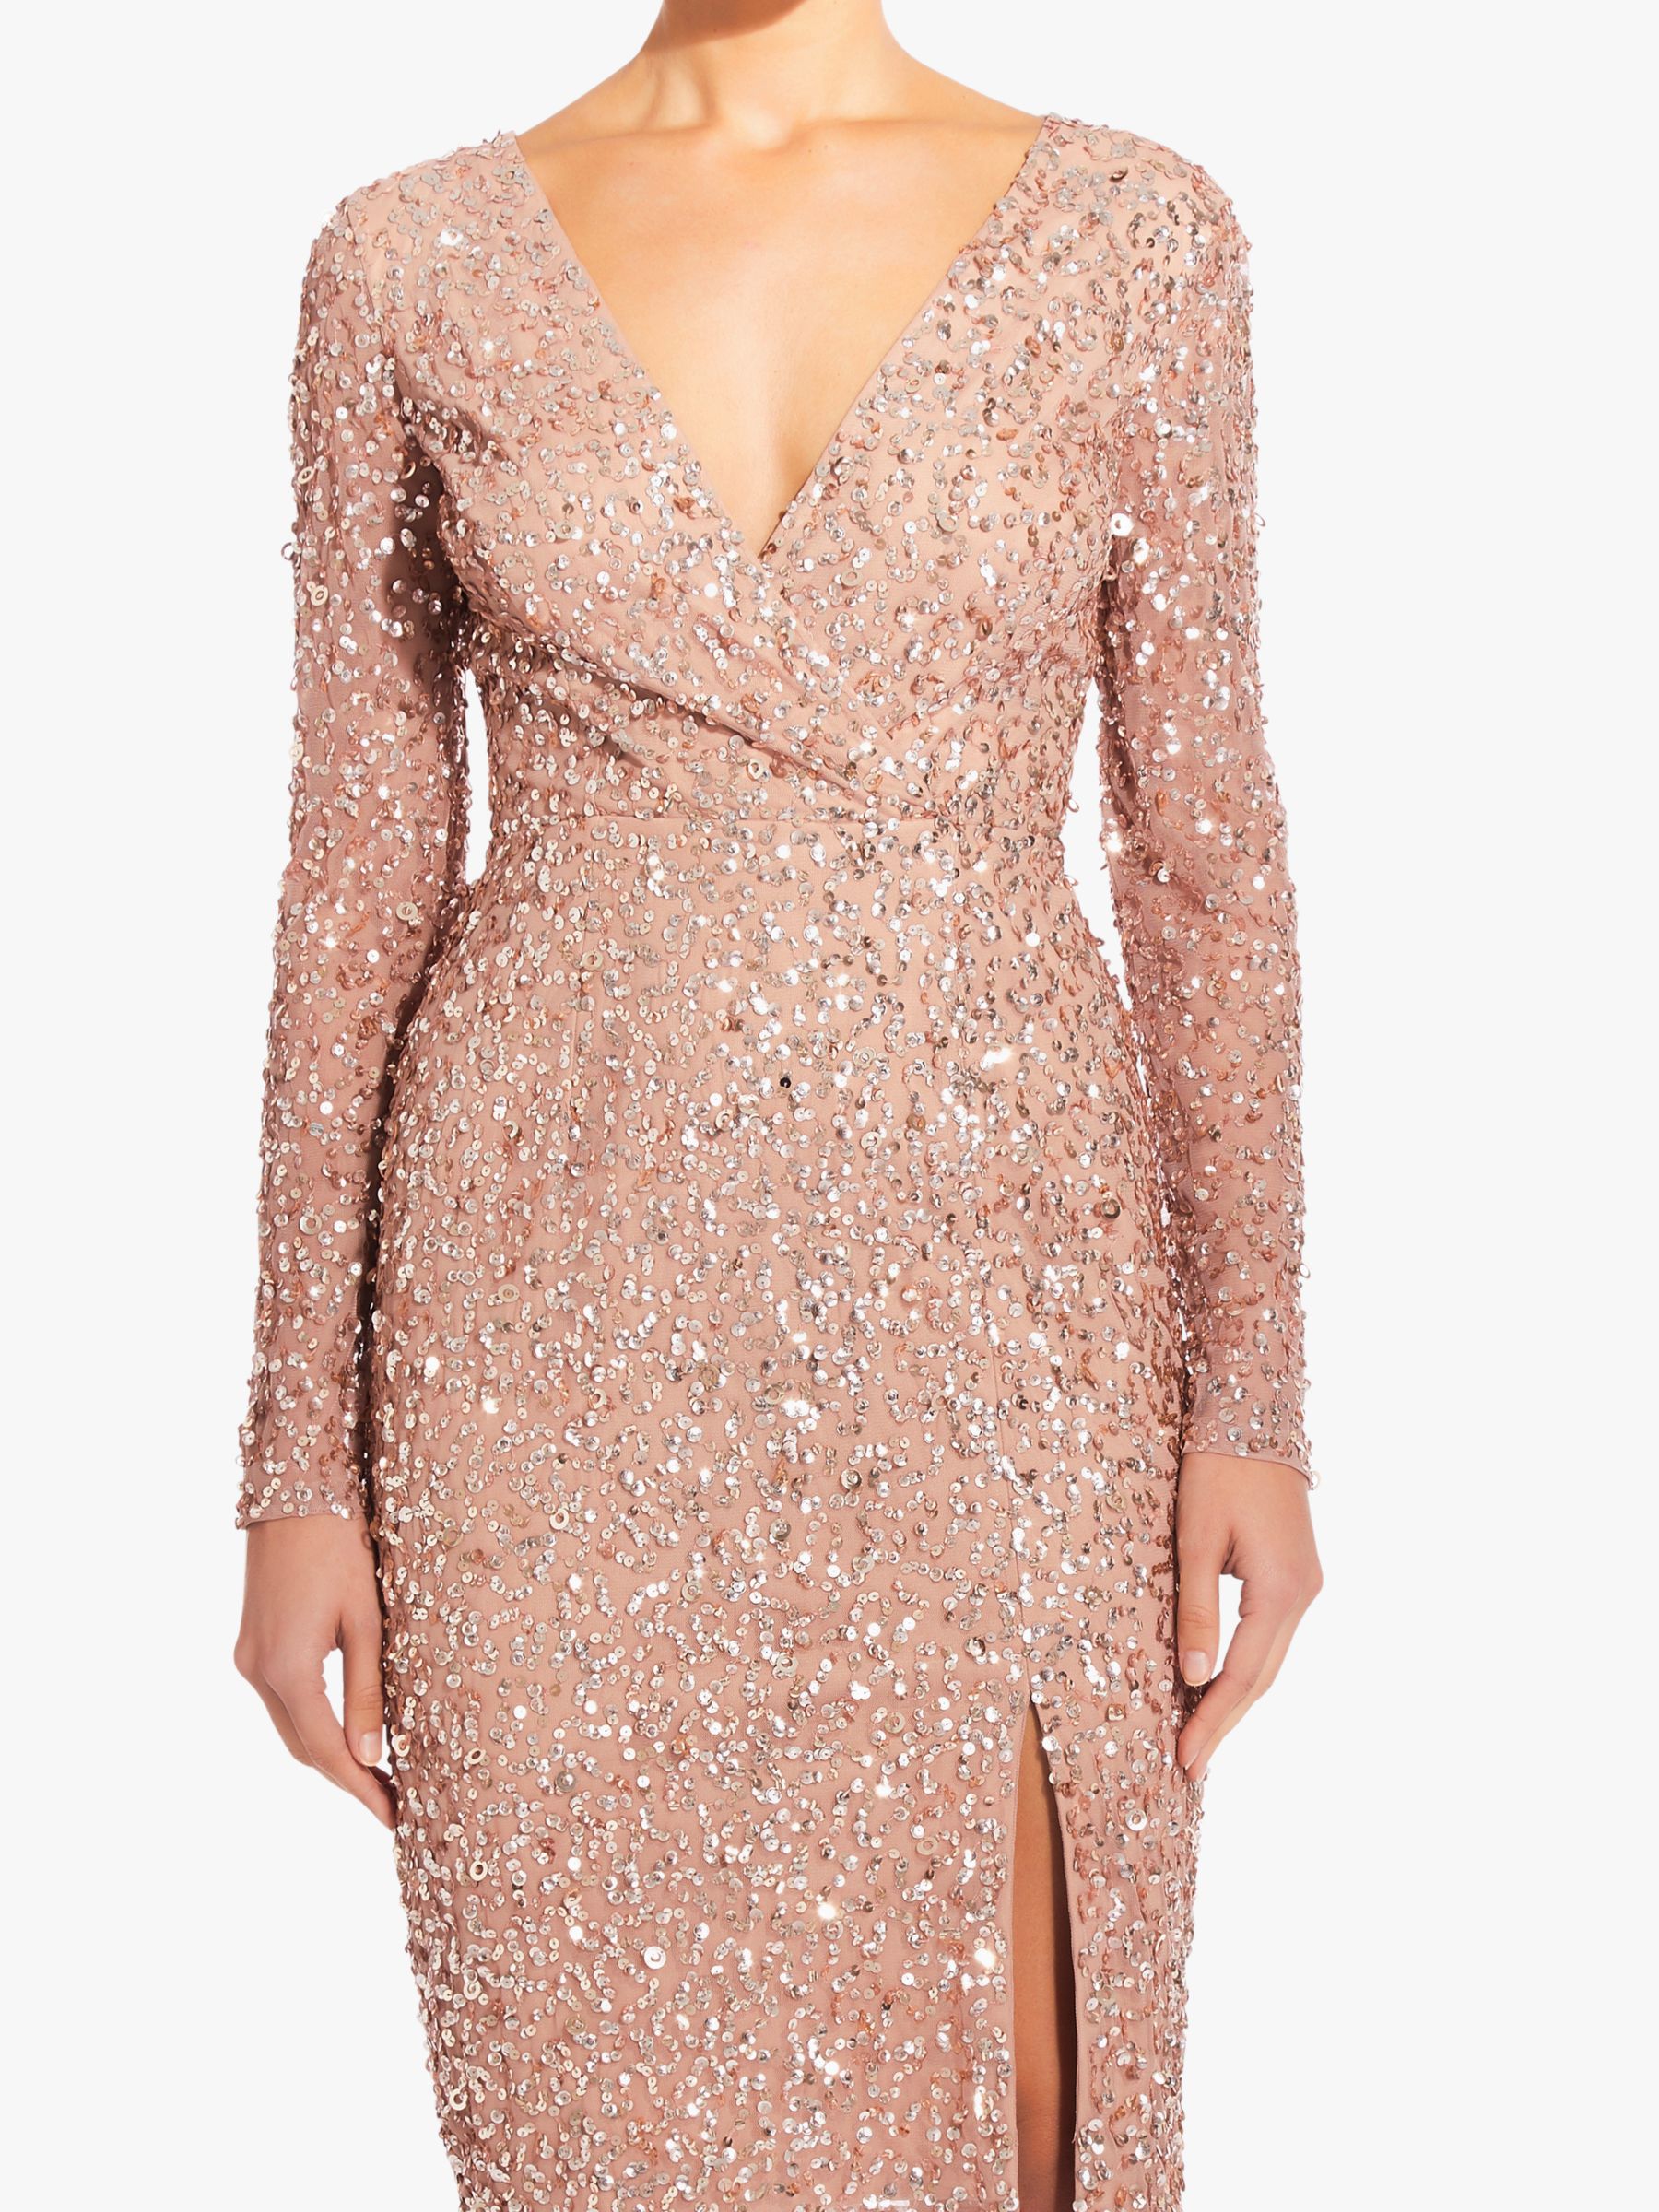 Adrianna Papell Beaded Wrap Dress, Rose Gold